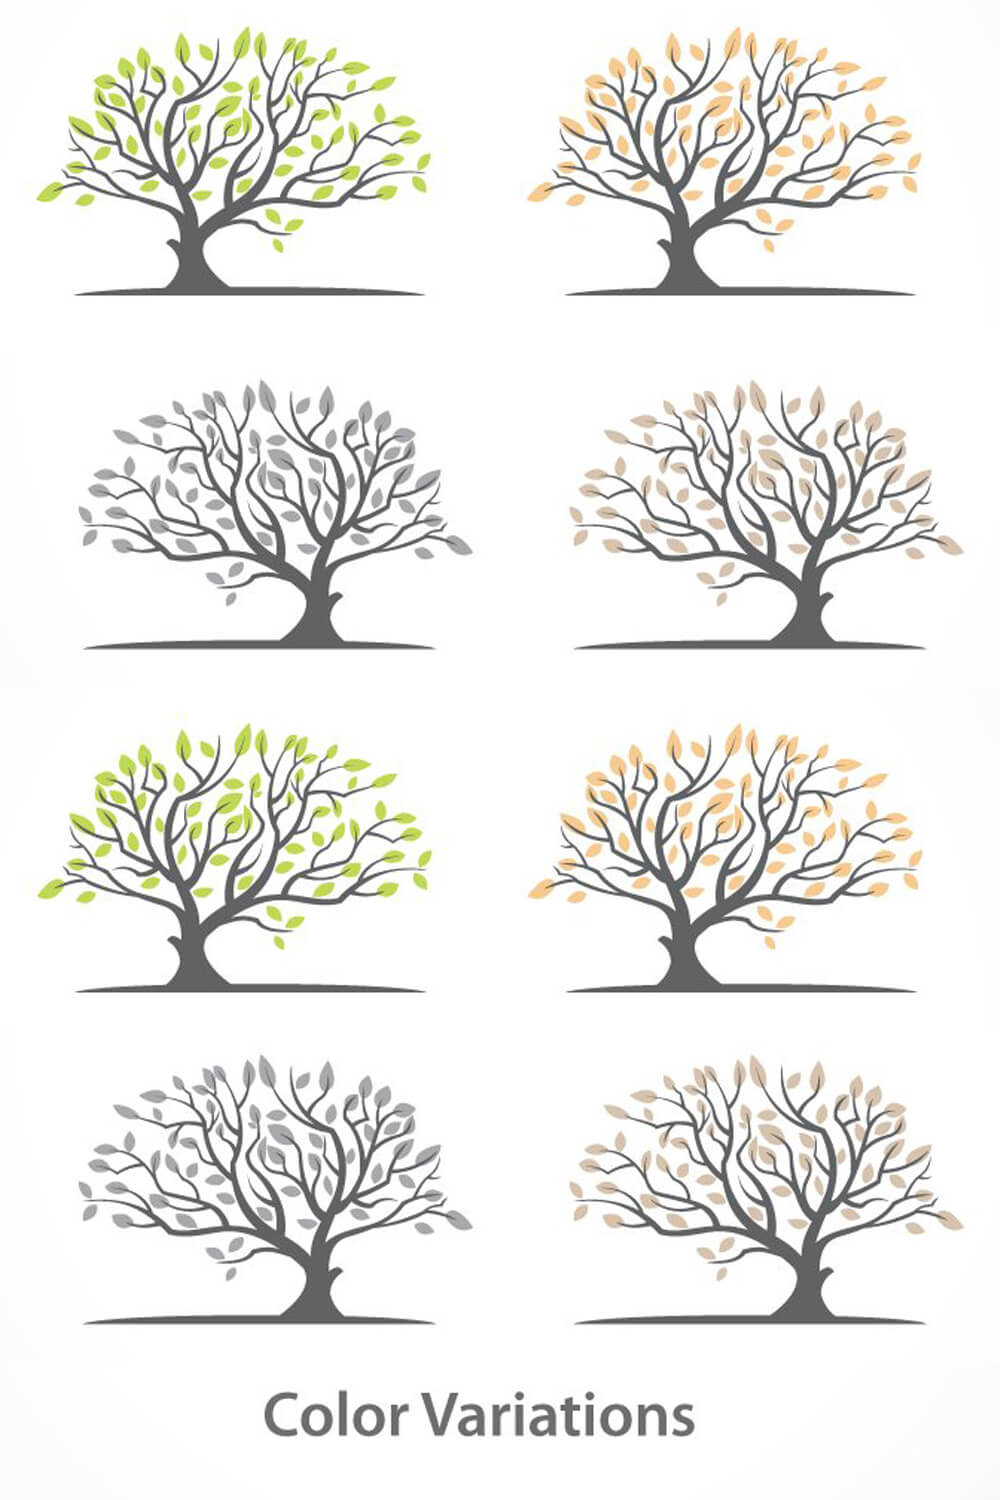 Color variations on examples 8 trees.